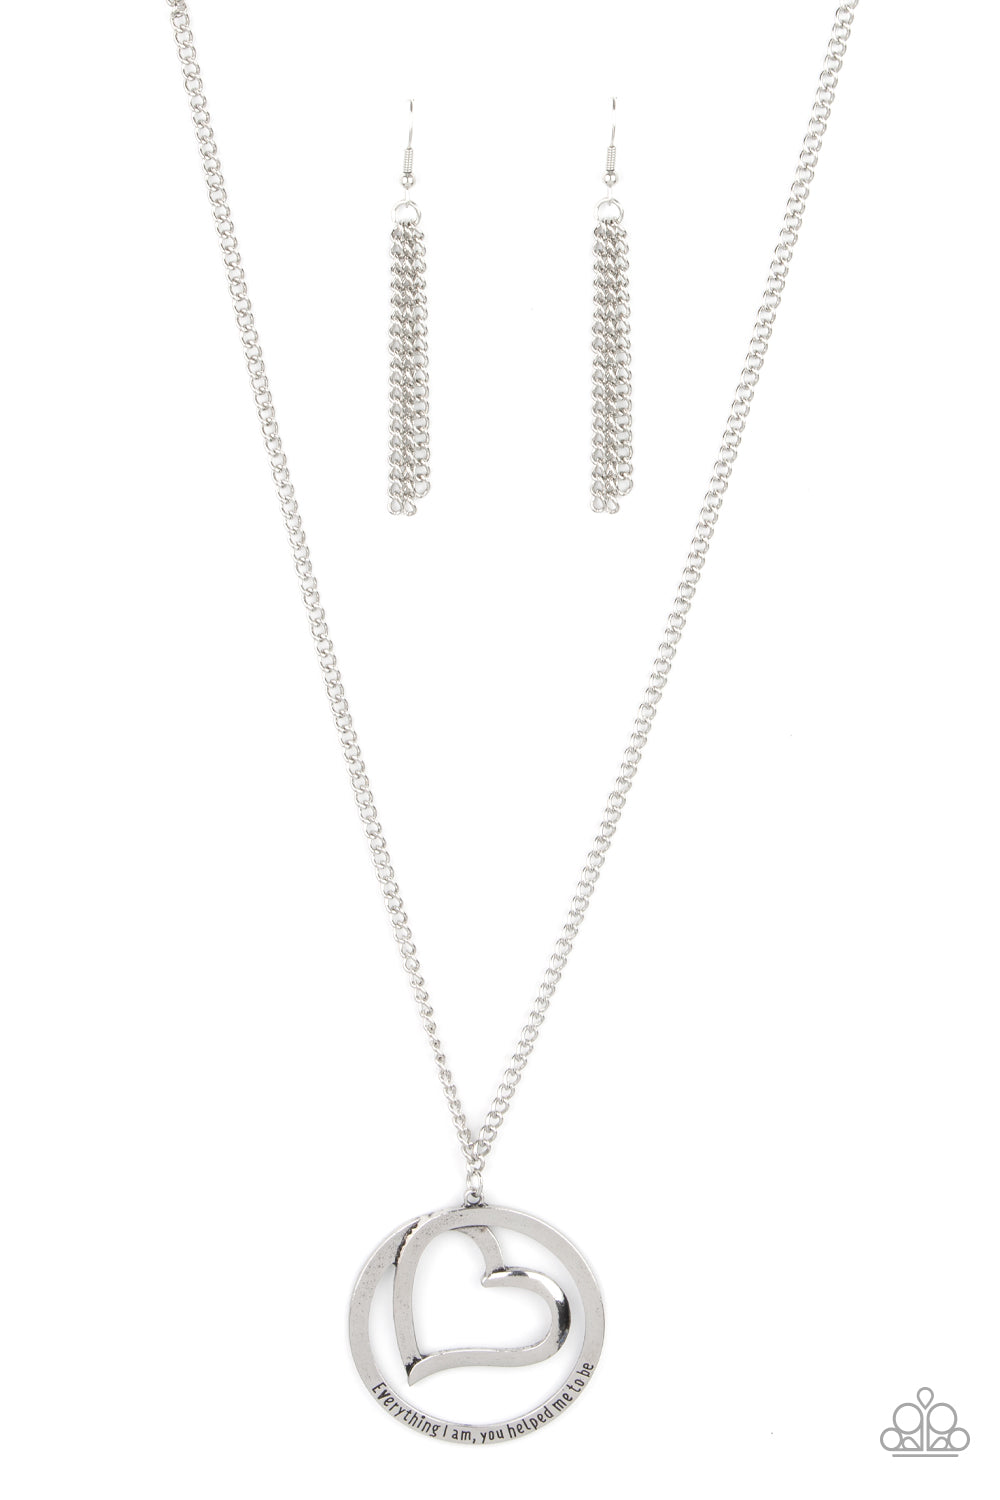 Positively Perfect Silver Necklace Paparazzi